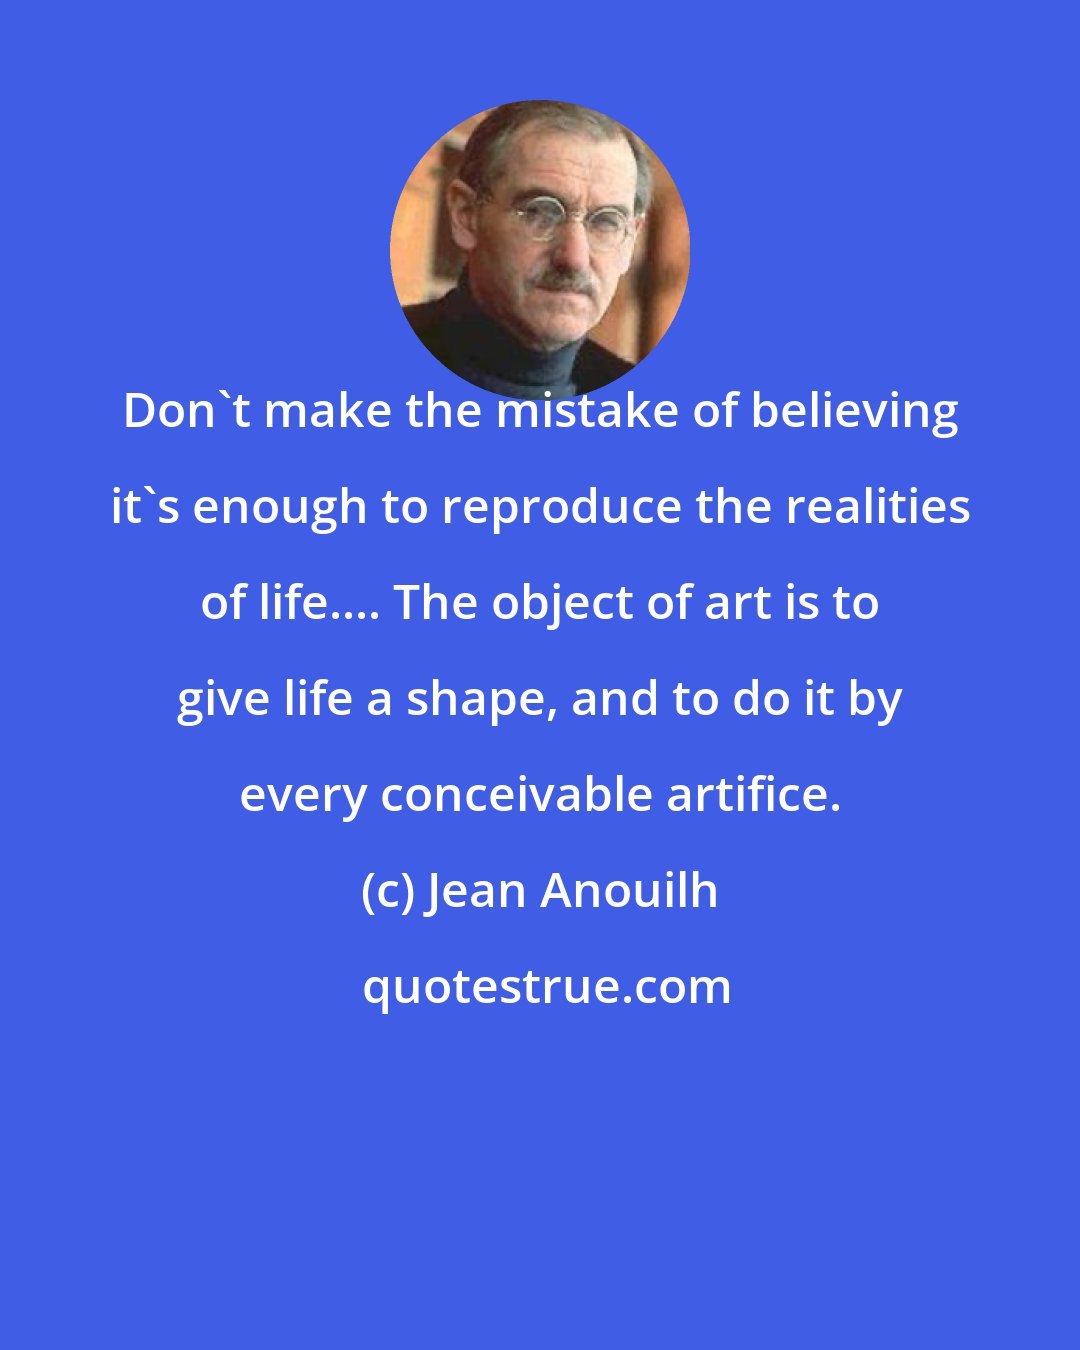 Jean Anouilh: Don't make the mistake of believing it's enough to reproduce the realities of life.... The object of art is to give life a shape, and to do it by every conceivable artifice.